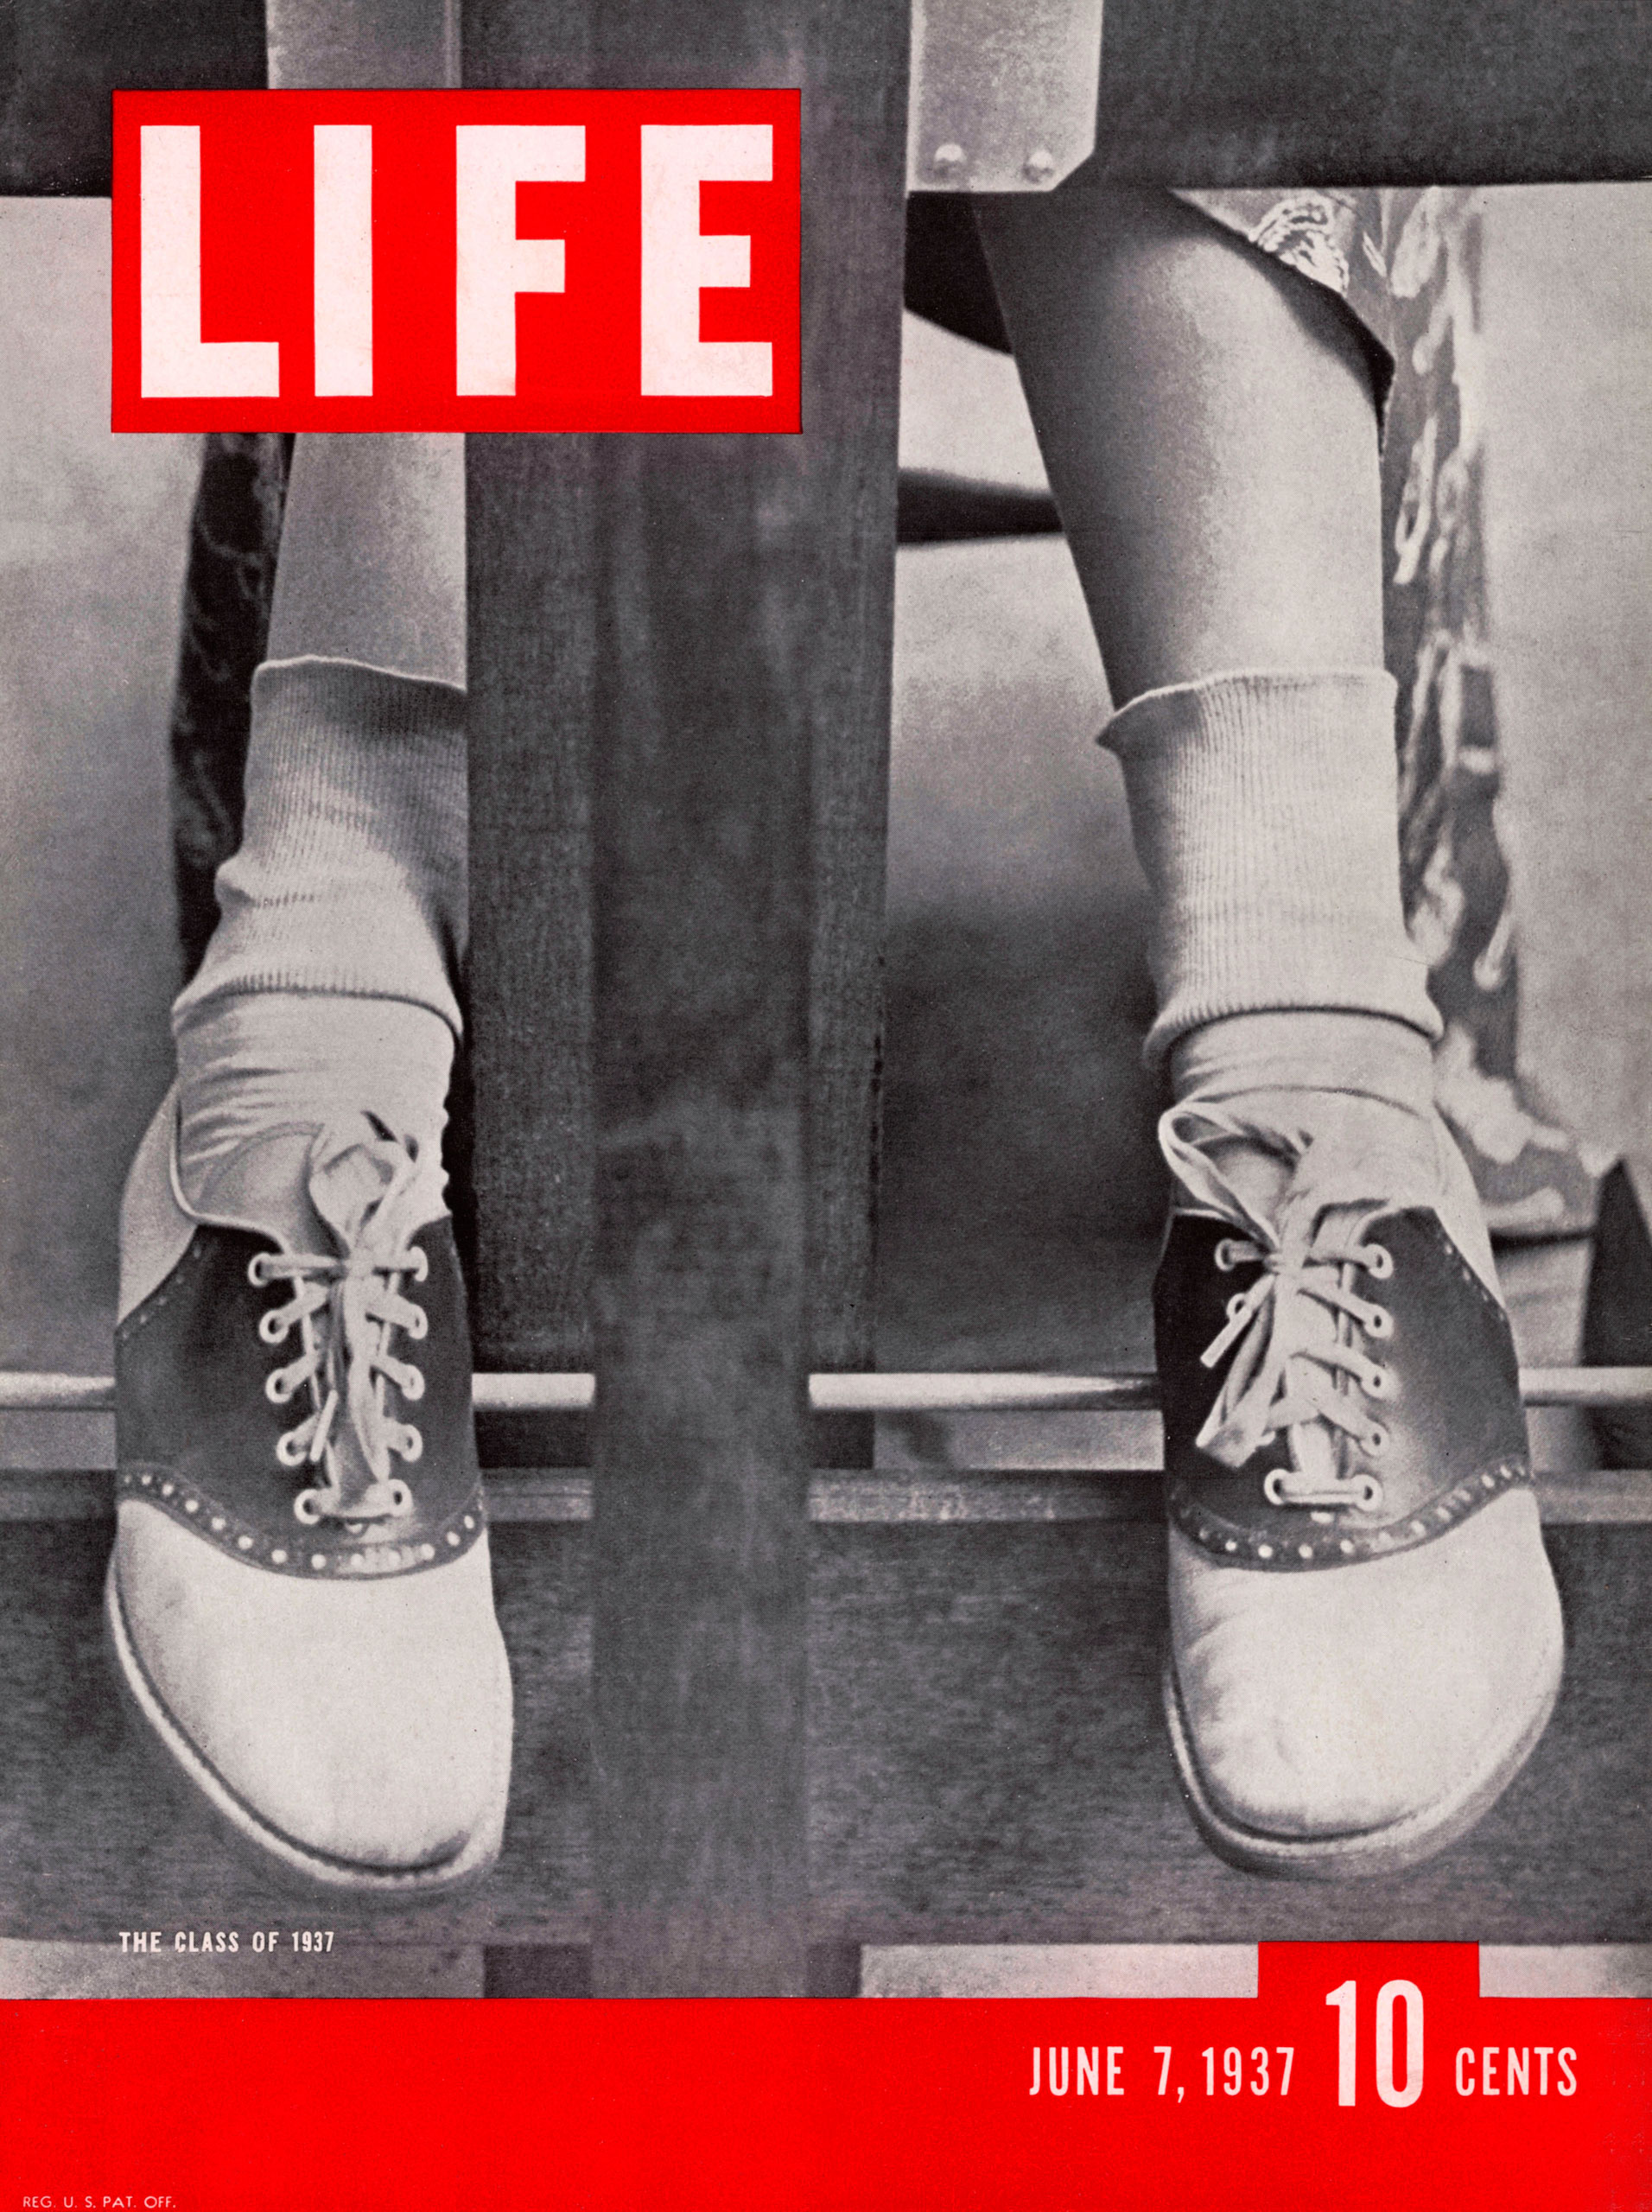 June 7, 1937 cover of LIFE magazine.